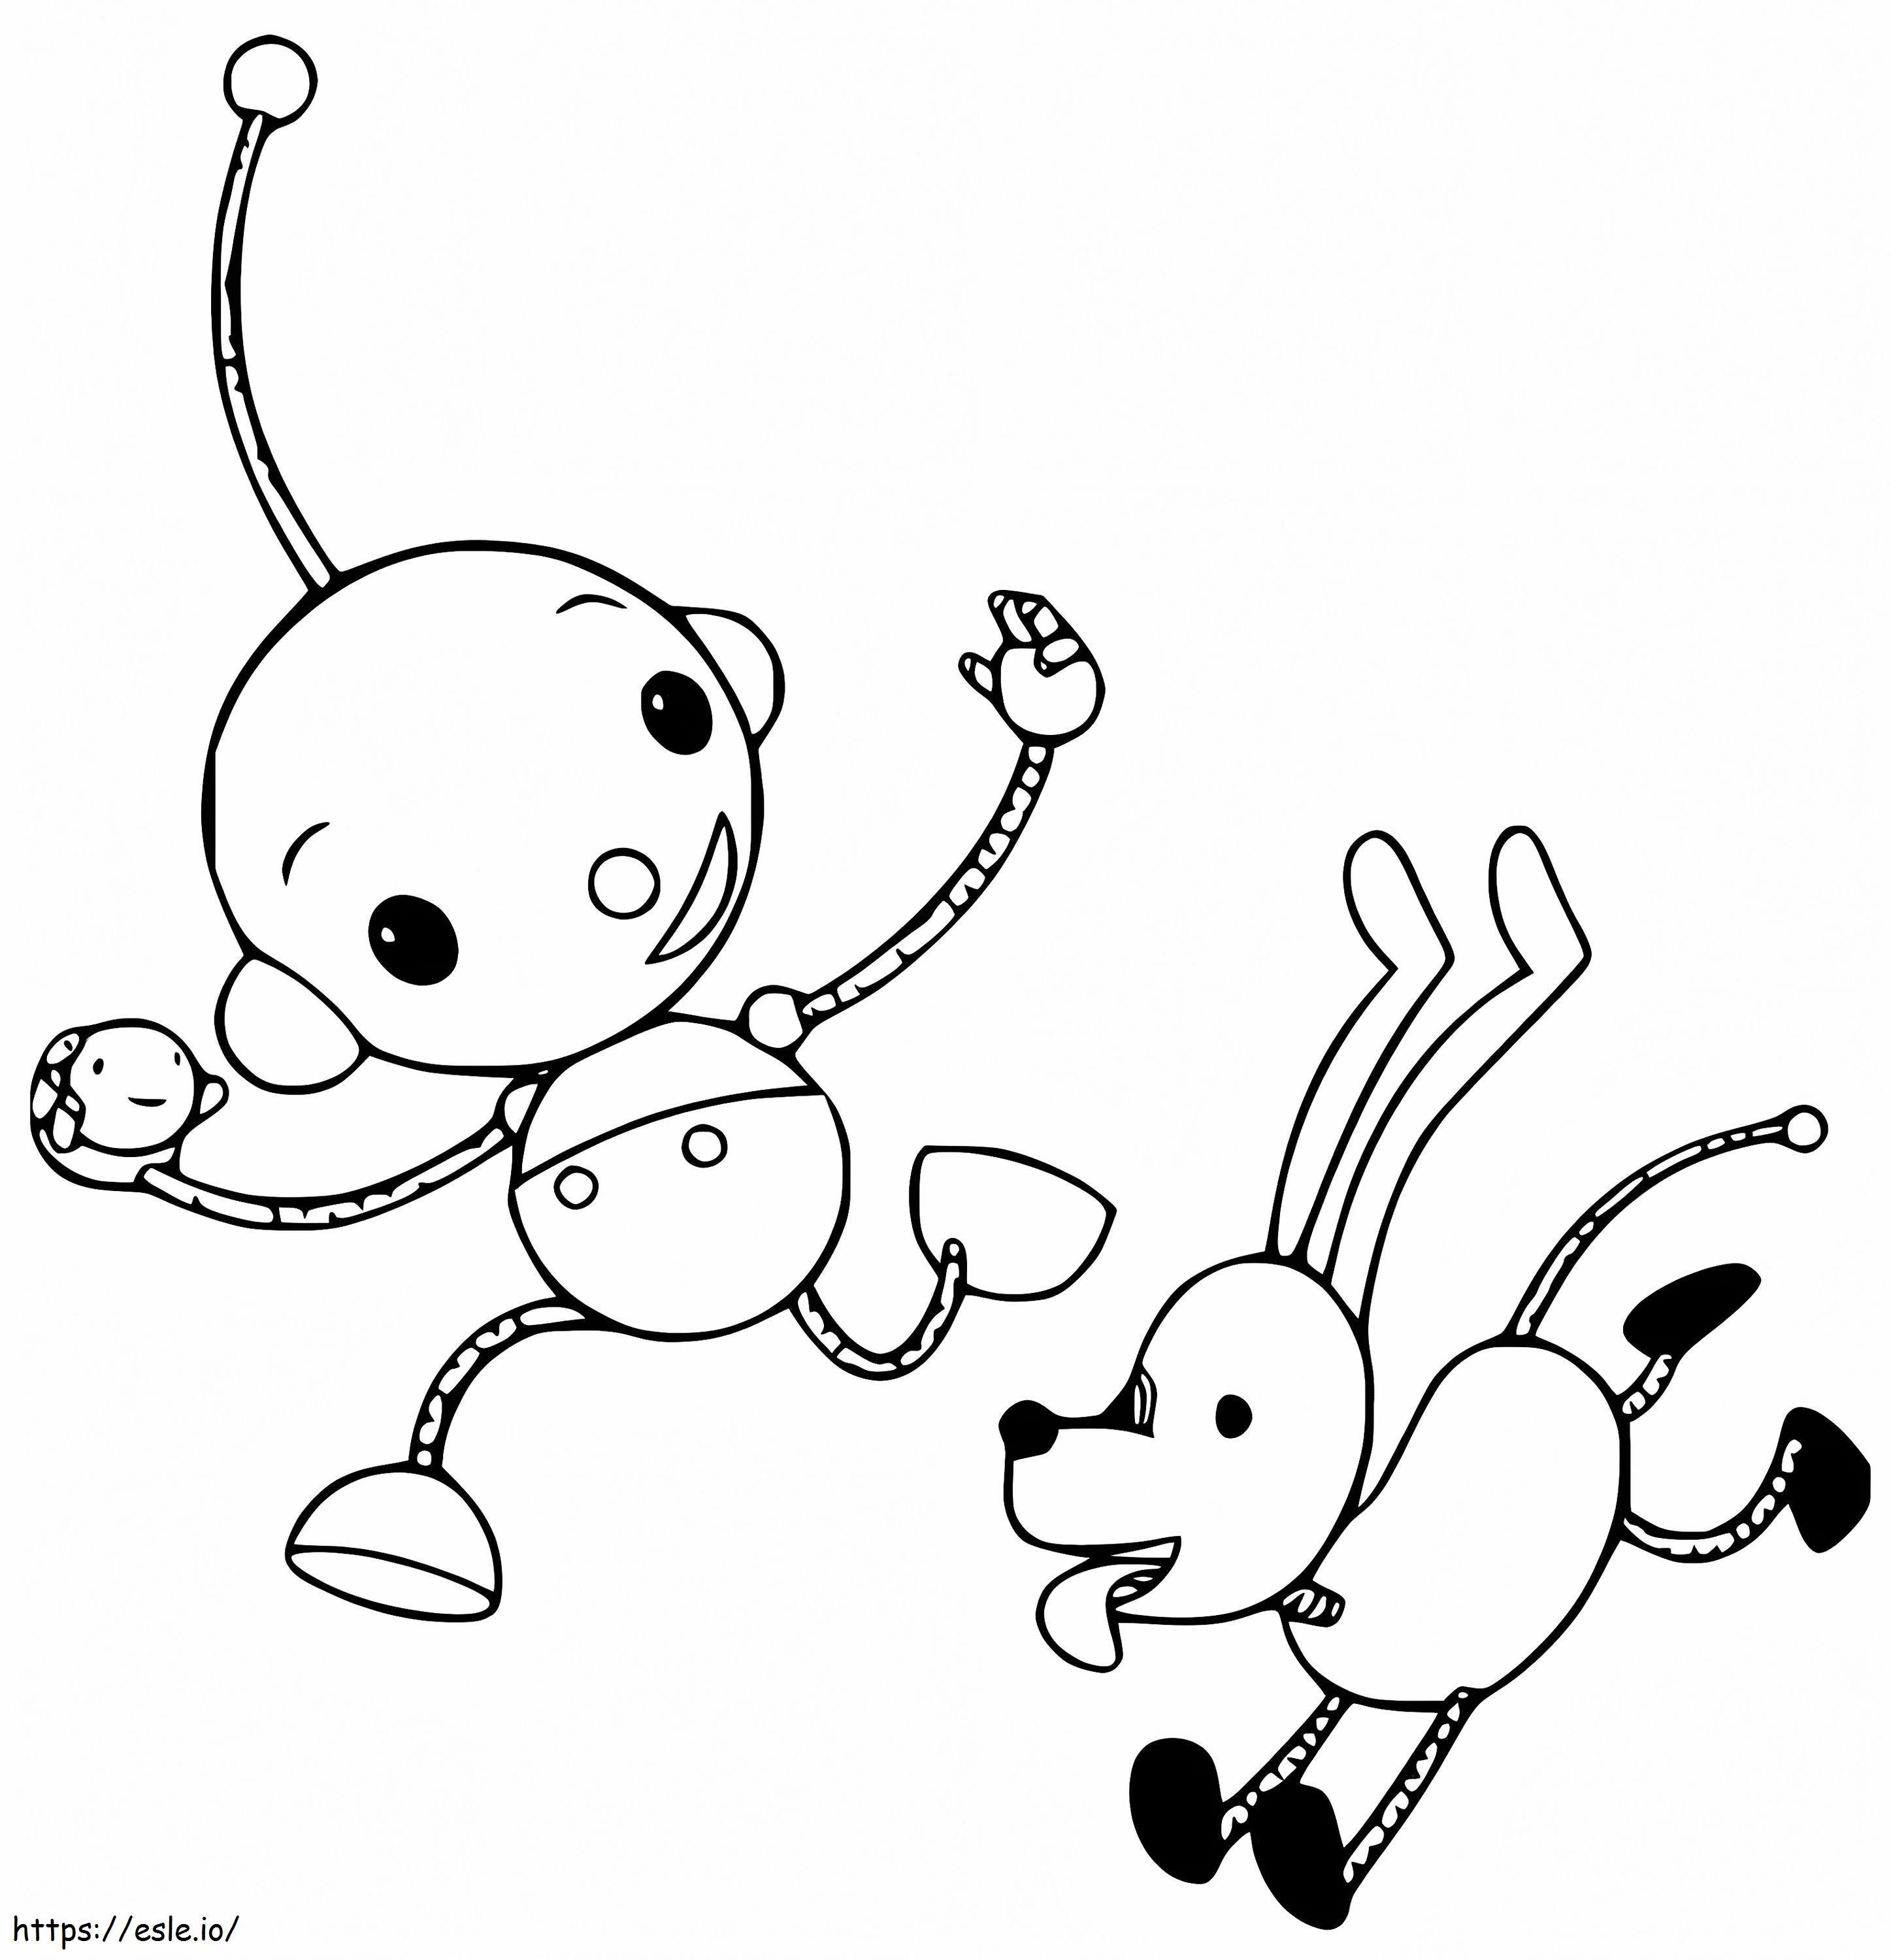 Oil Polie And Spot coloring page